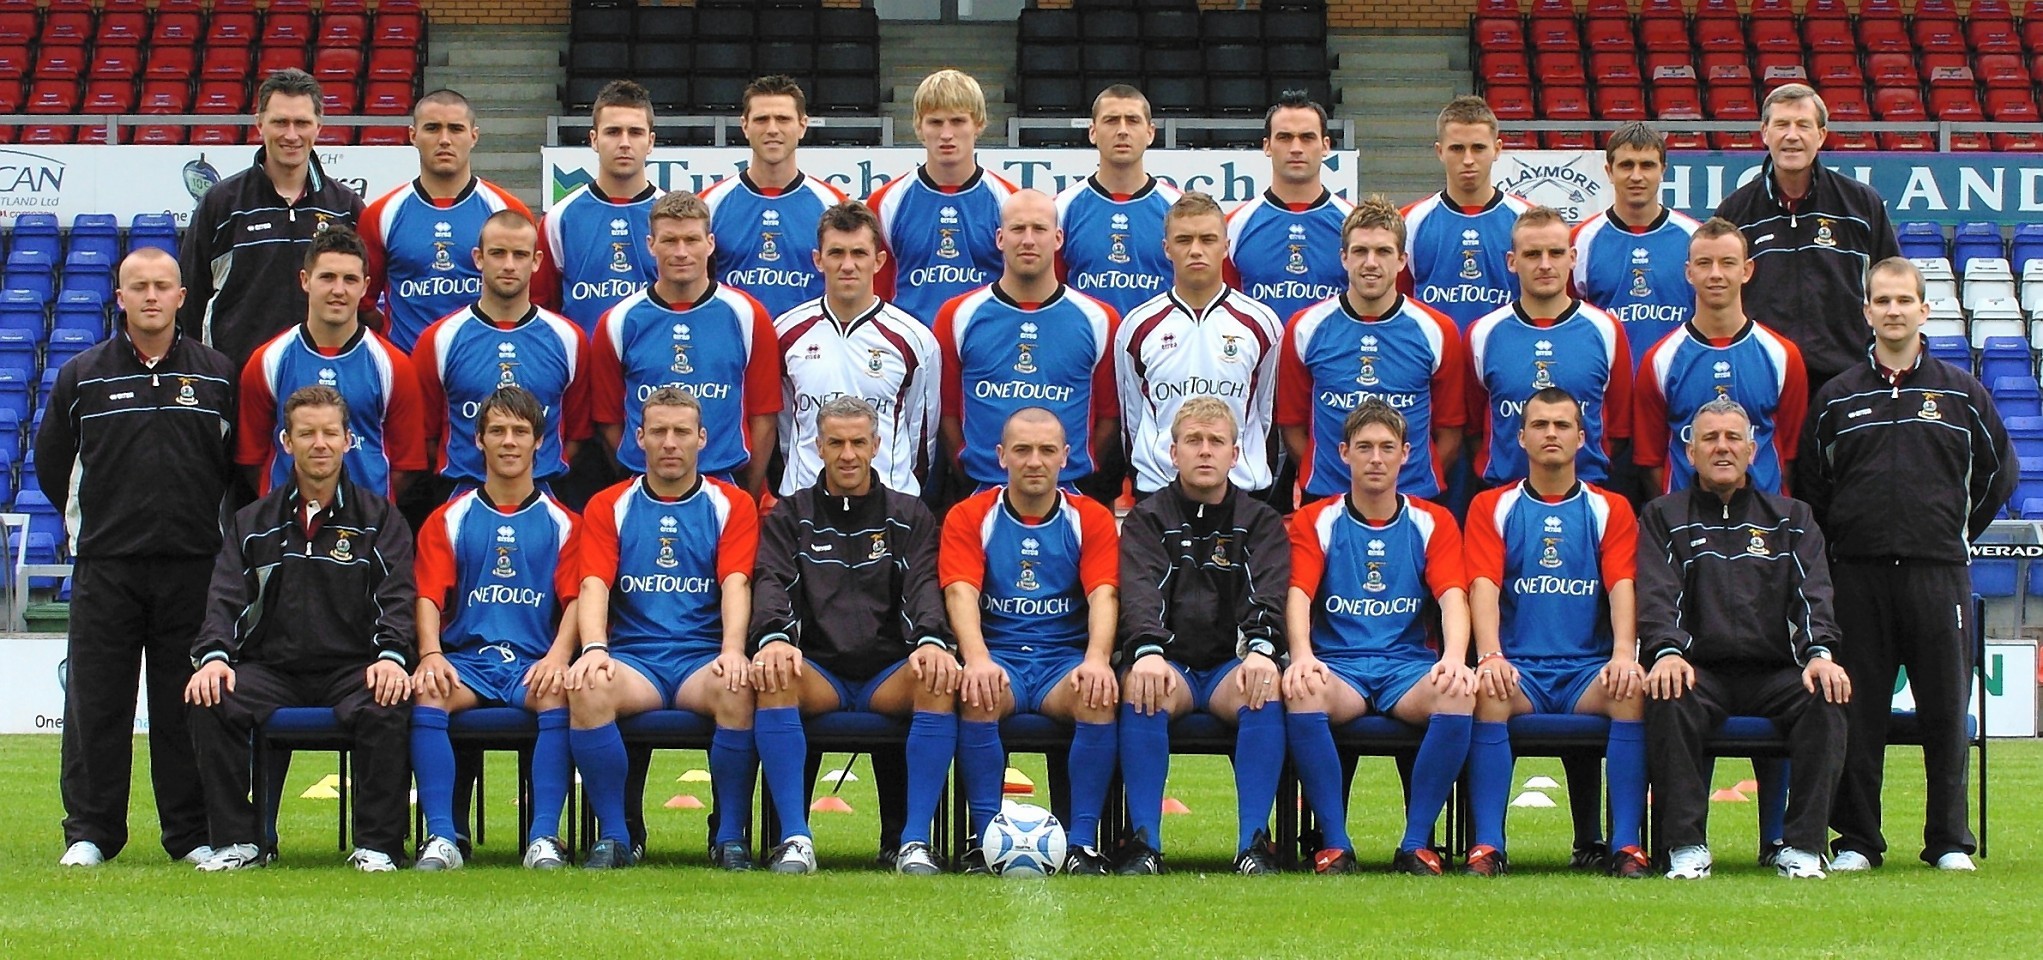 Chris Finnigan, back row, third from left with his Caley Thistle team mates in July 2005